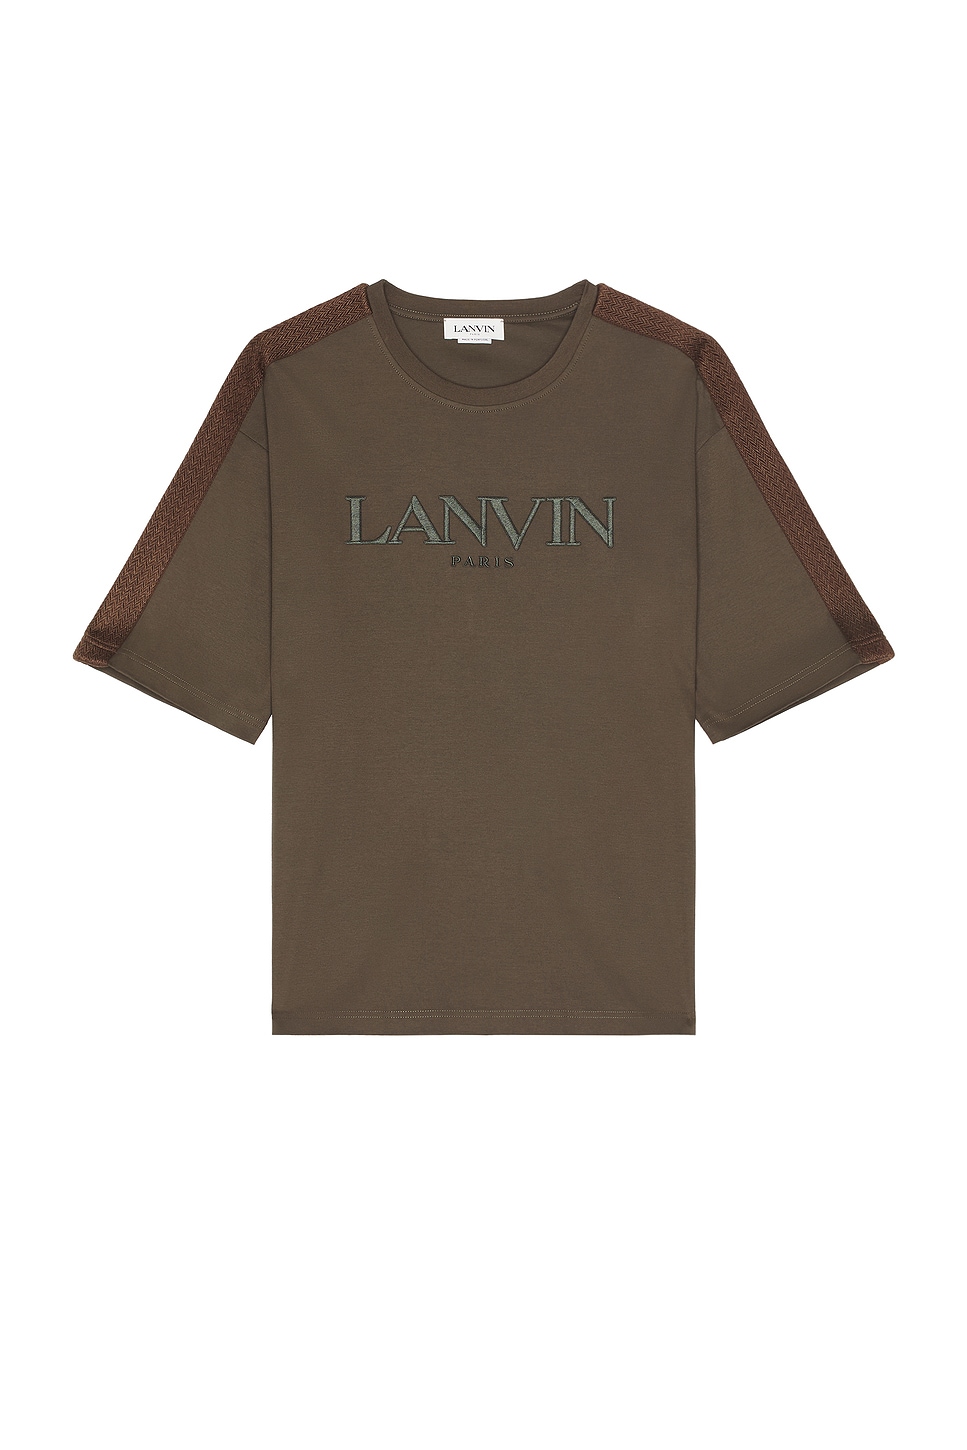 Lanvin Side Curb T-shirt In Brown